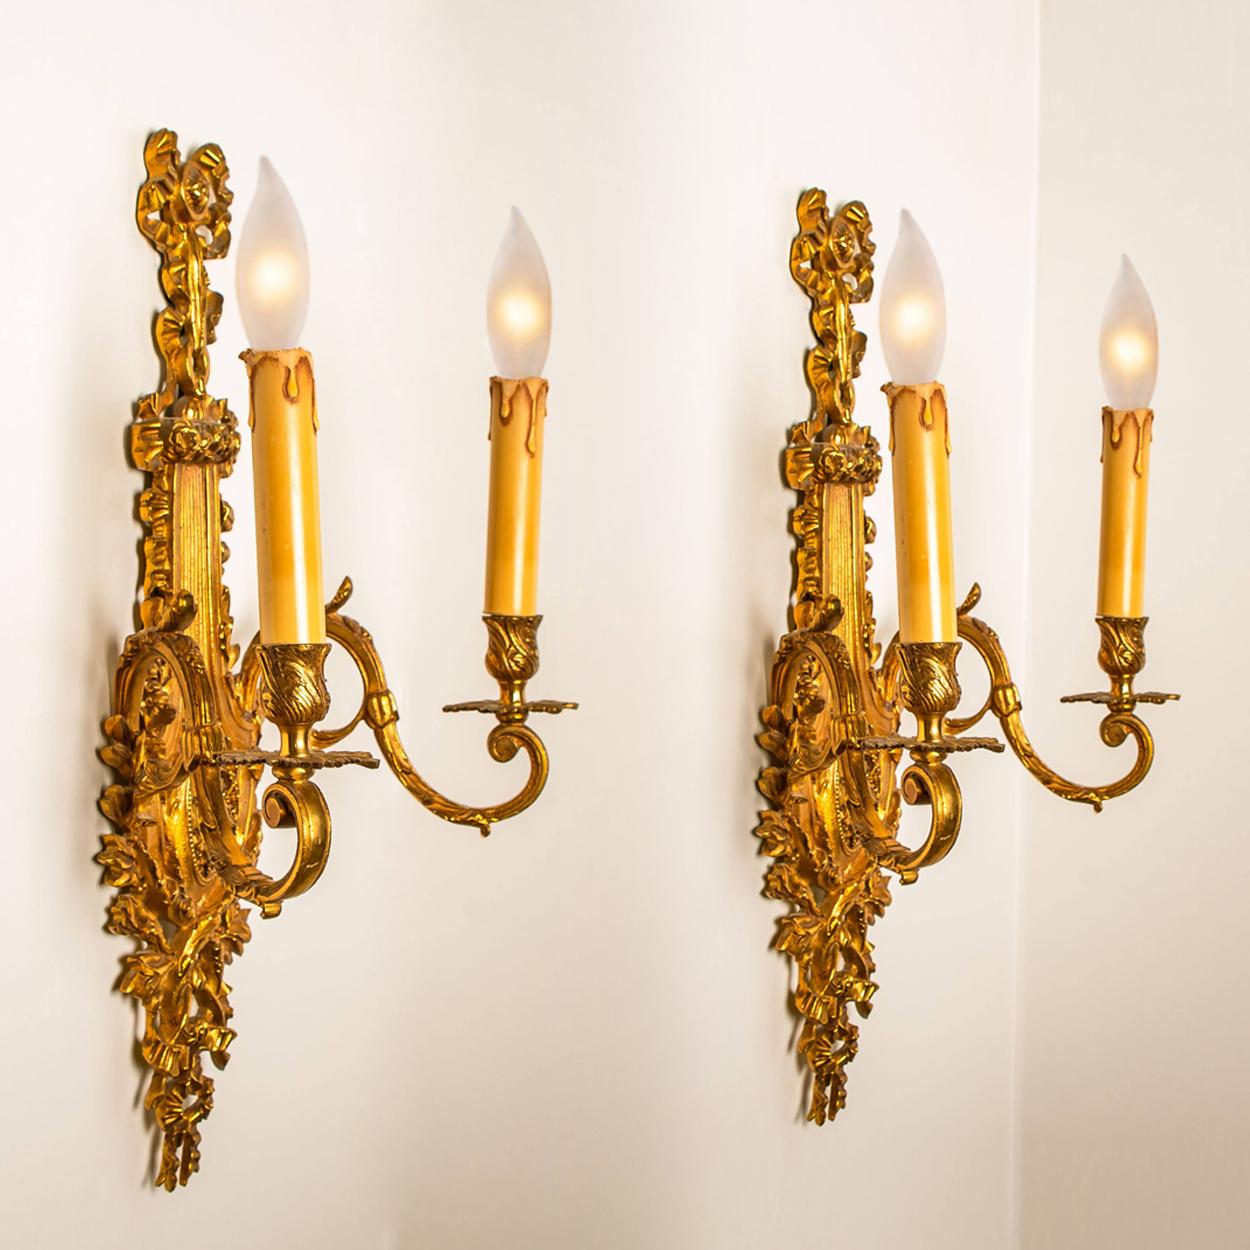 19th Century Antique Pair of French Massive Bronze Louis XVI Wall Sconces